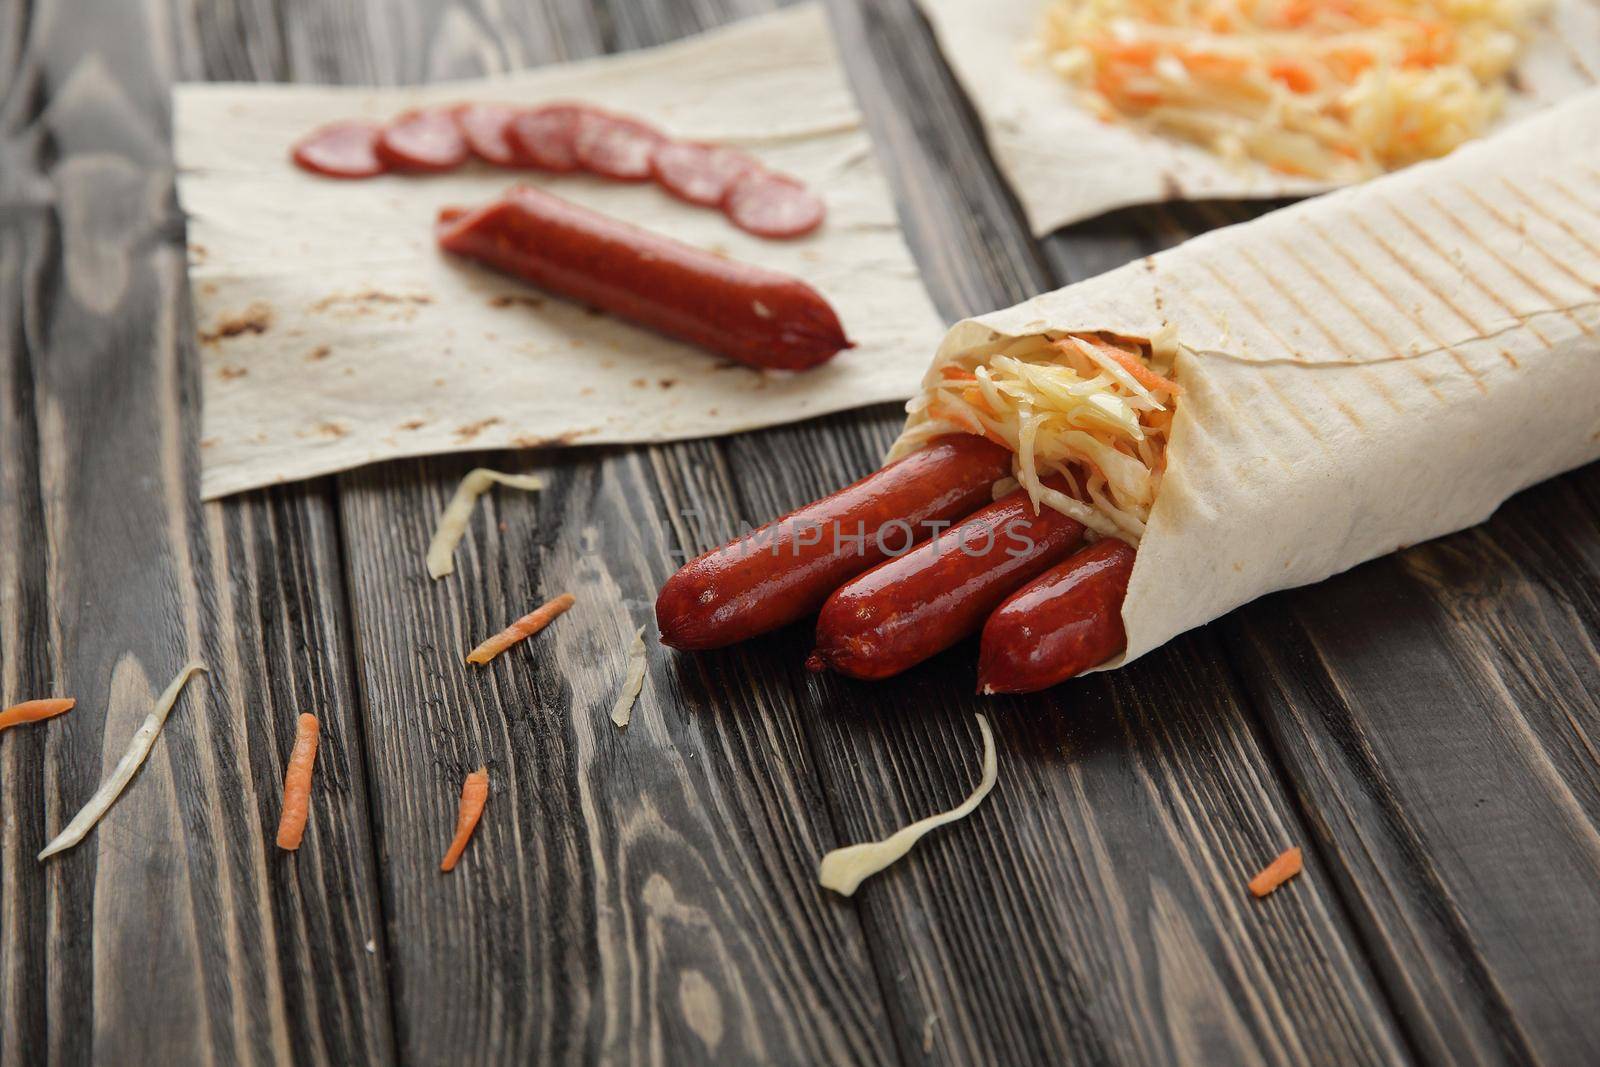 smoked sausage in pita bread on wooden background.